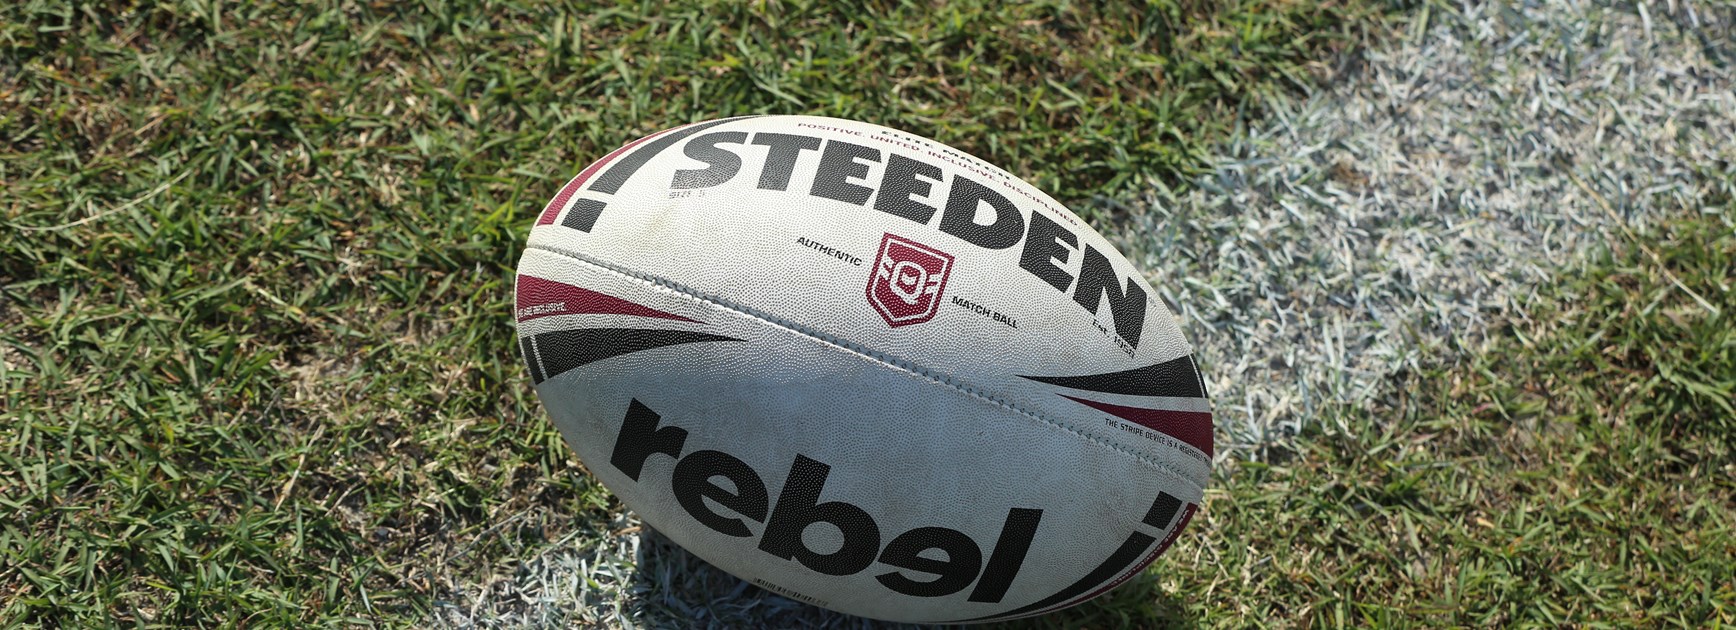 Bundaberg Rugby League Round 5 preview